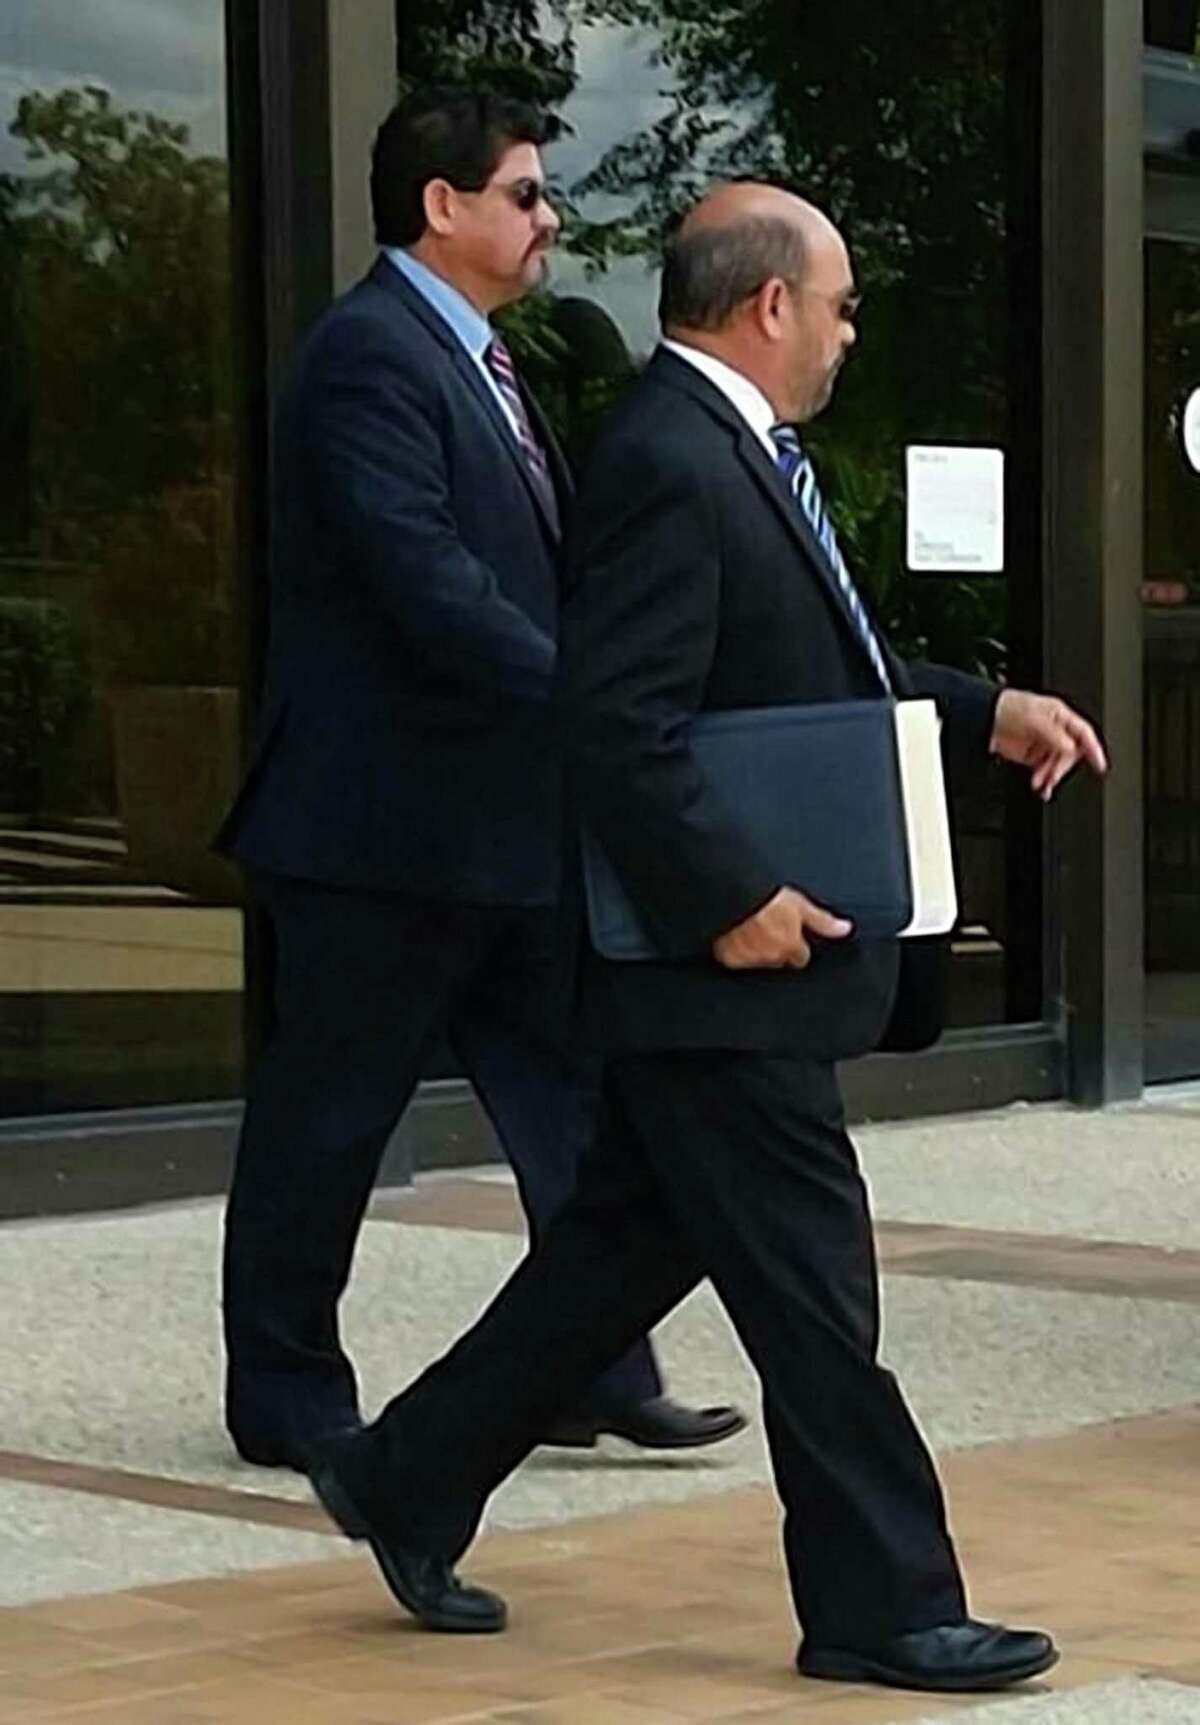 Samuel Mullen, (left) who is alleged to have bribed an insurance consultant for area school districts, walking out of federal court today in San Antonio with his lawyer, David R. Gorena (right). Mullen entered a not guilty plea to a charge of conspiracy to commit wire fraud.